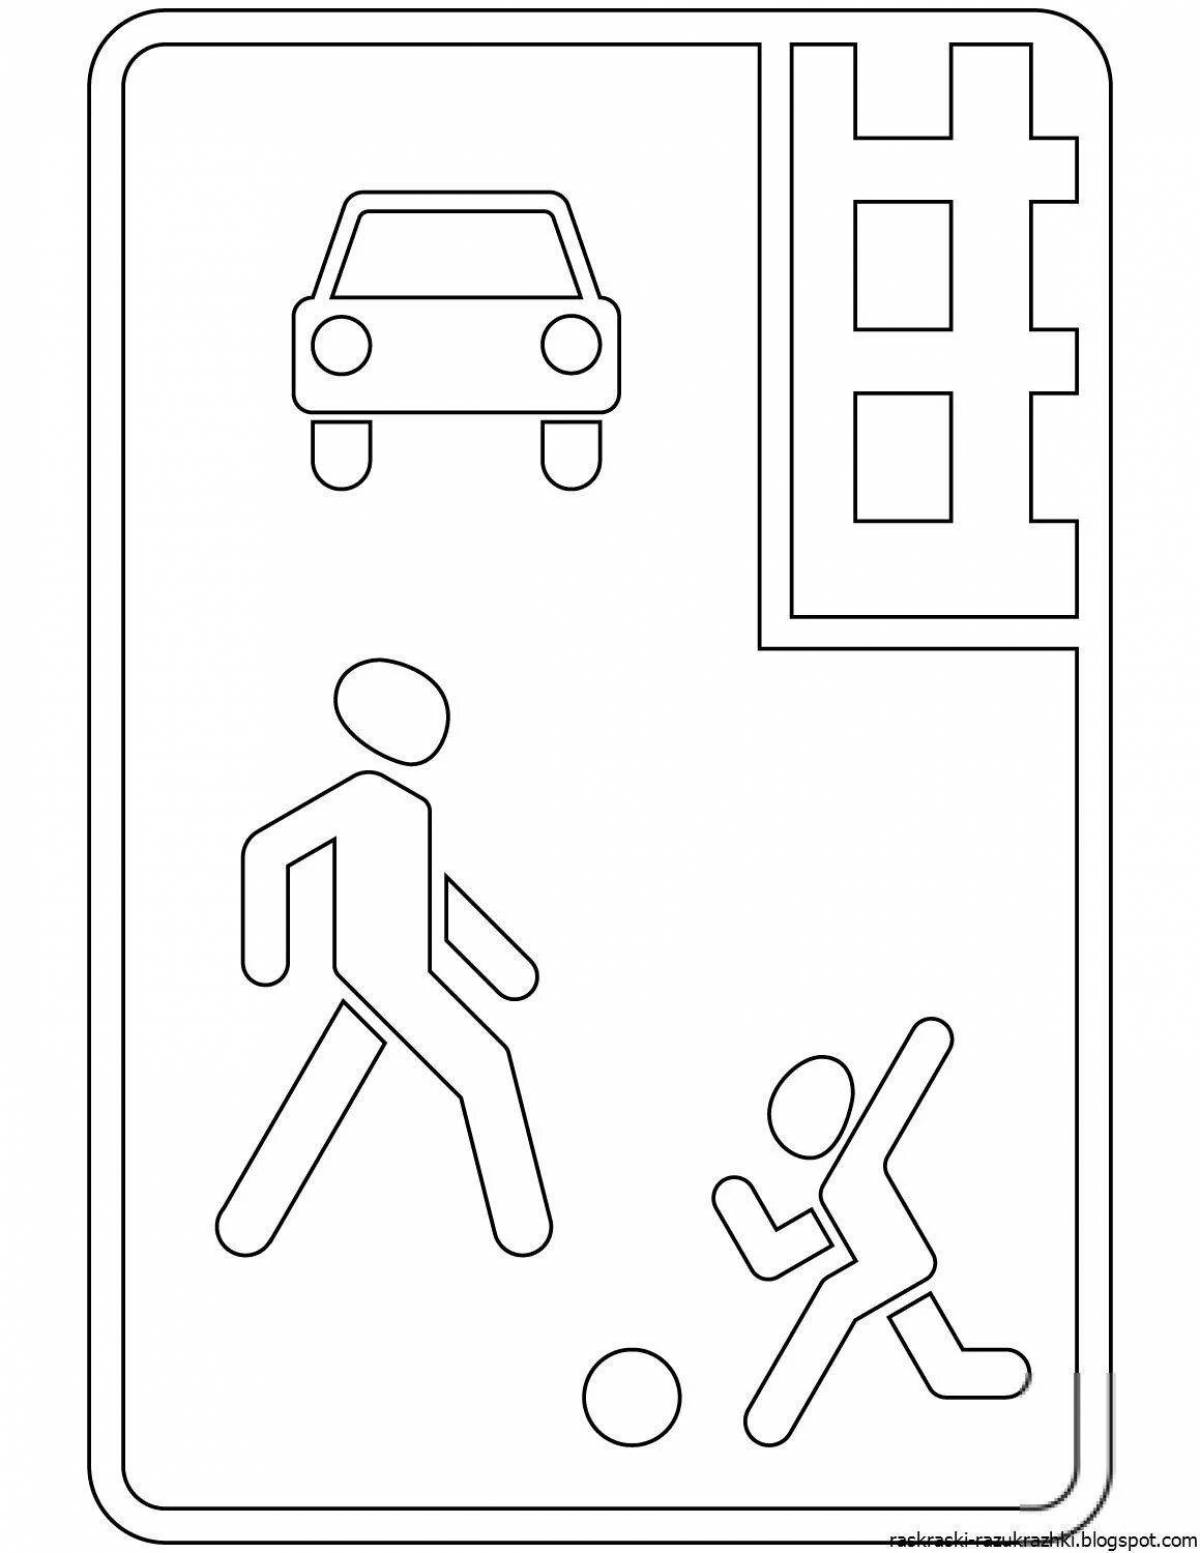 Coloring page awesome underpass sign